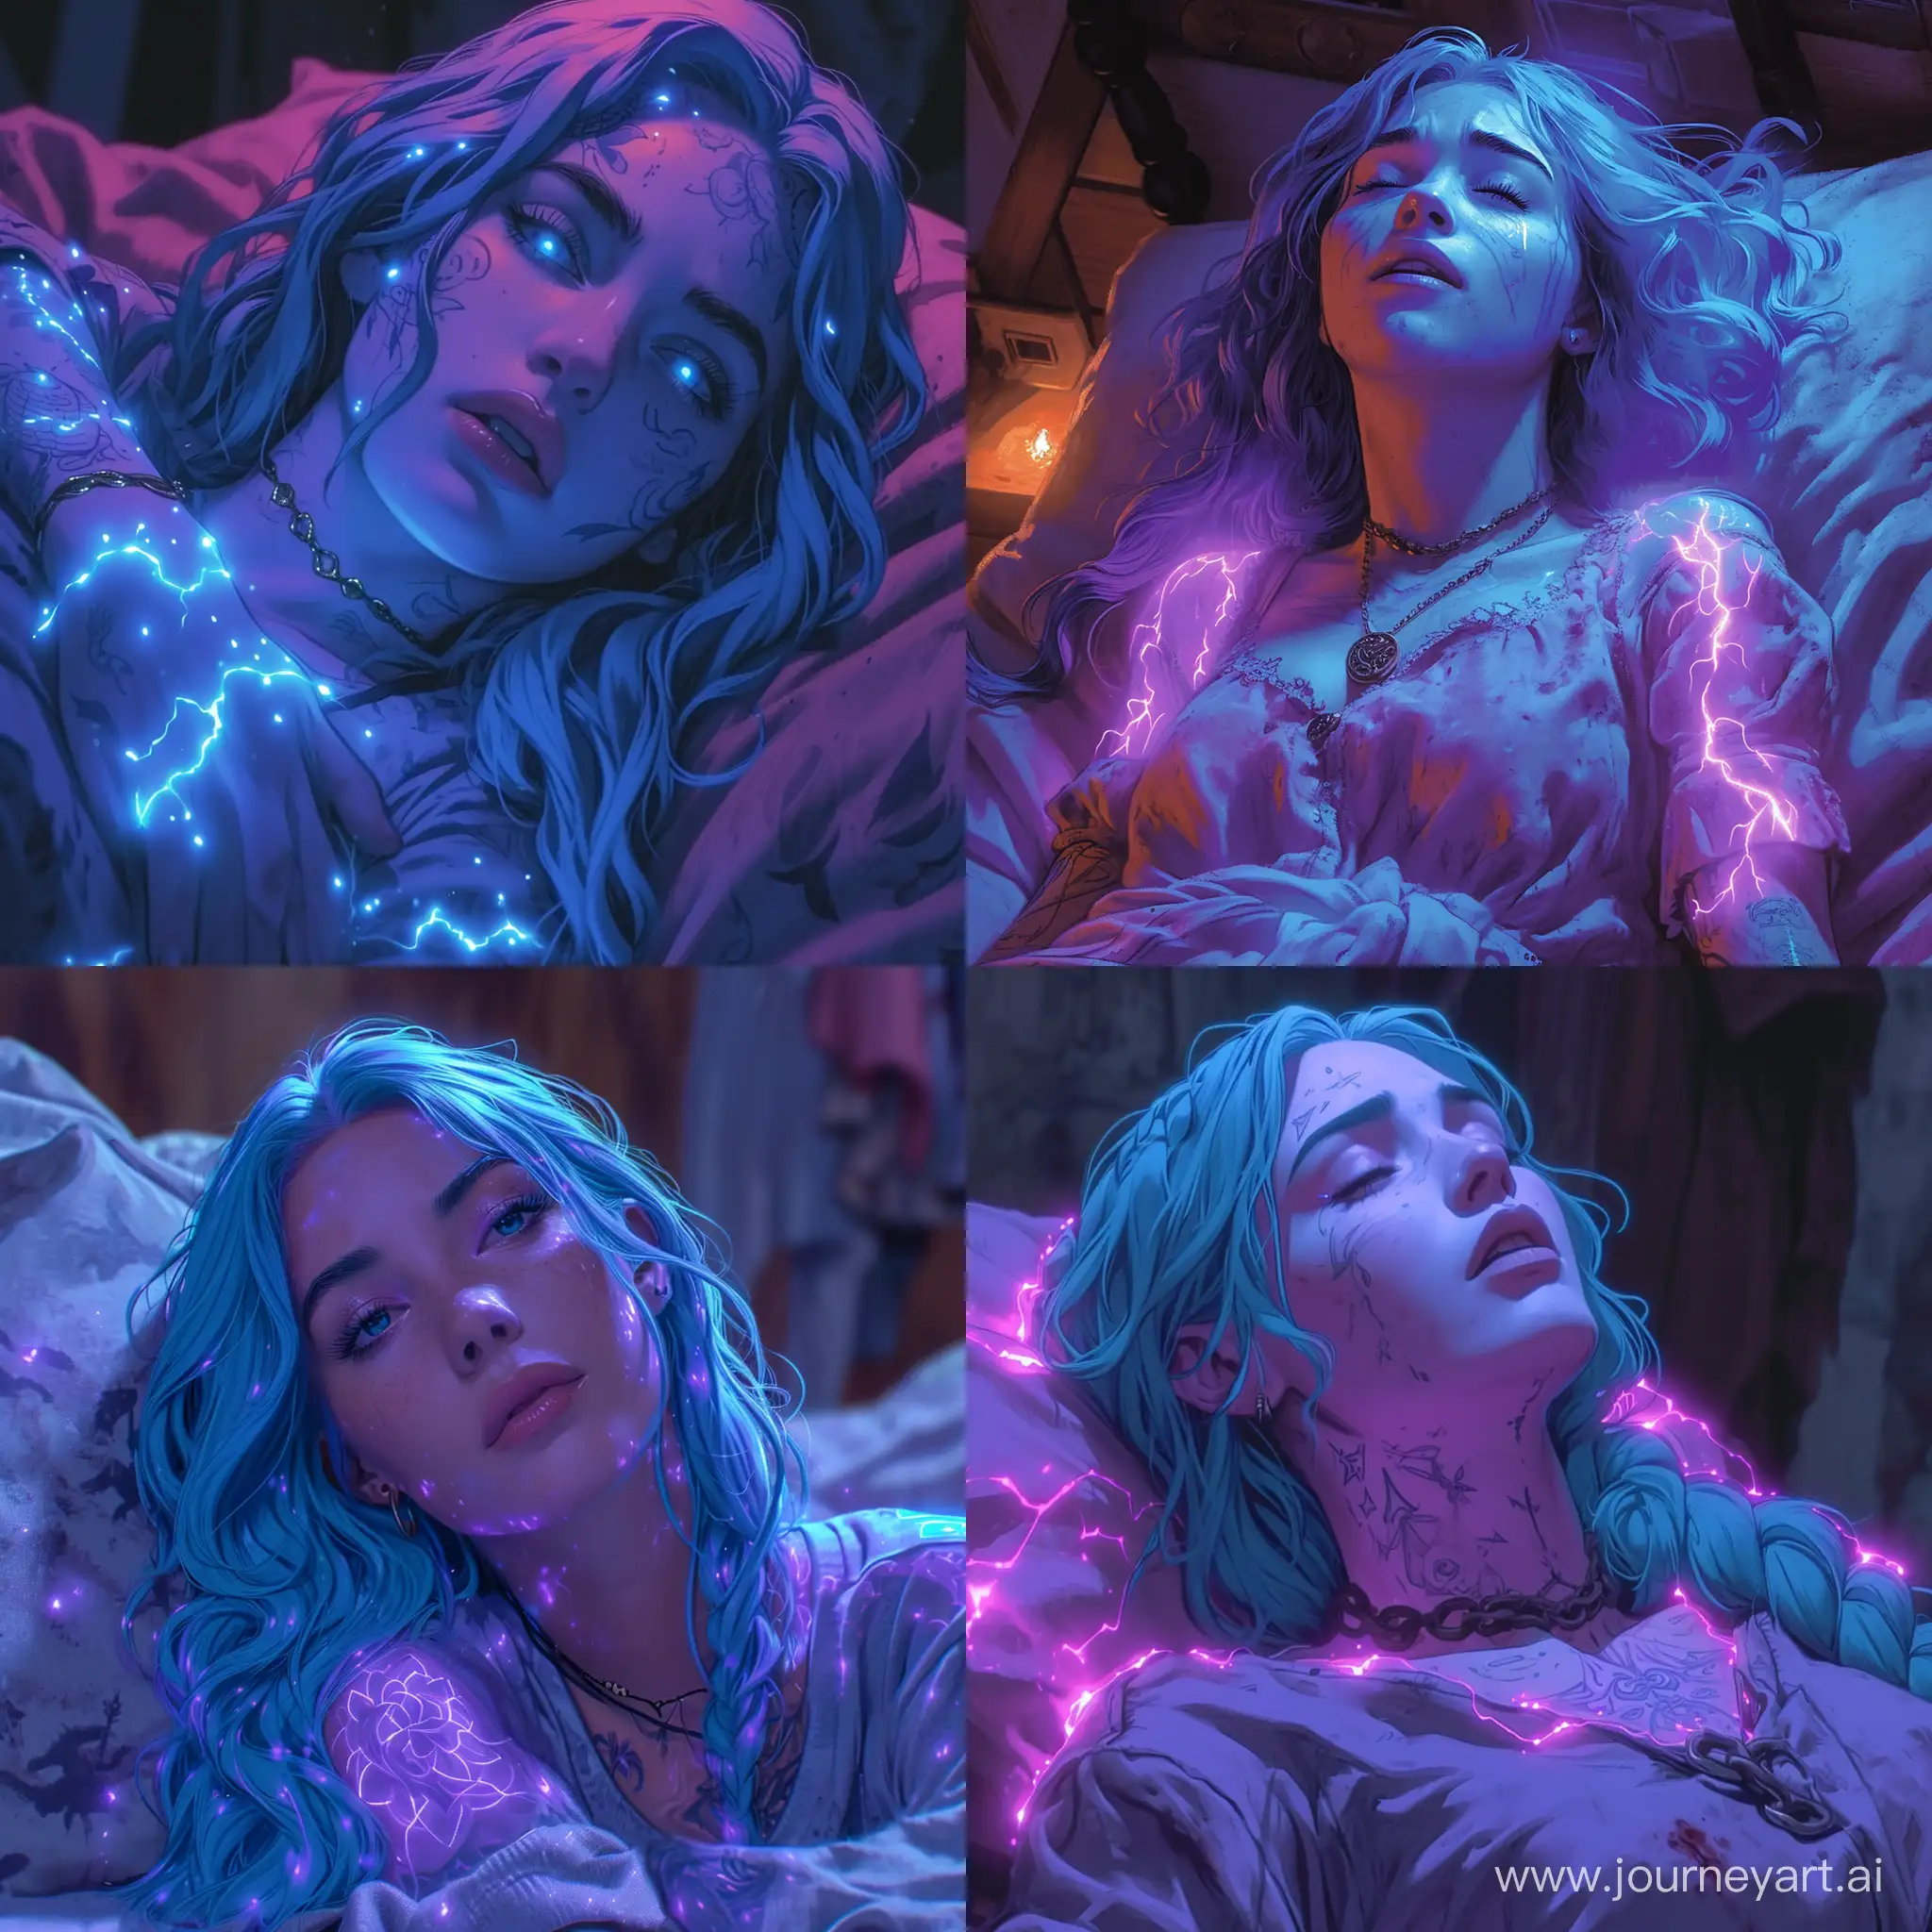 A bioluminescent comic art illustration of blue haired woman with glowing tattoos lying in her bed | visible strain etched across her face | tense atmosphere | purple ethereal beauty | otherworldly light | vivid colors and intricate details | epic confrontation between light and darkness  --s 800 --style raw